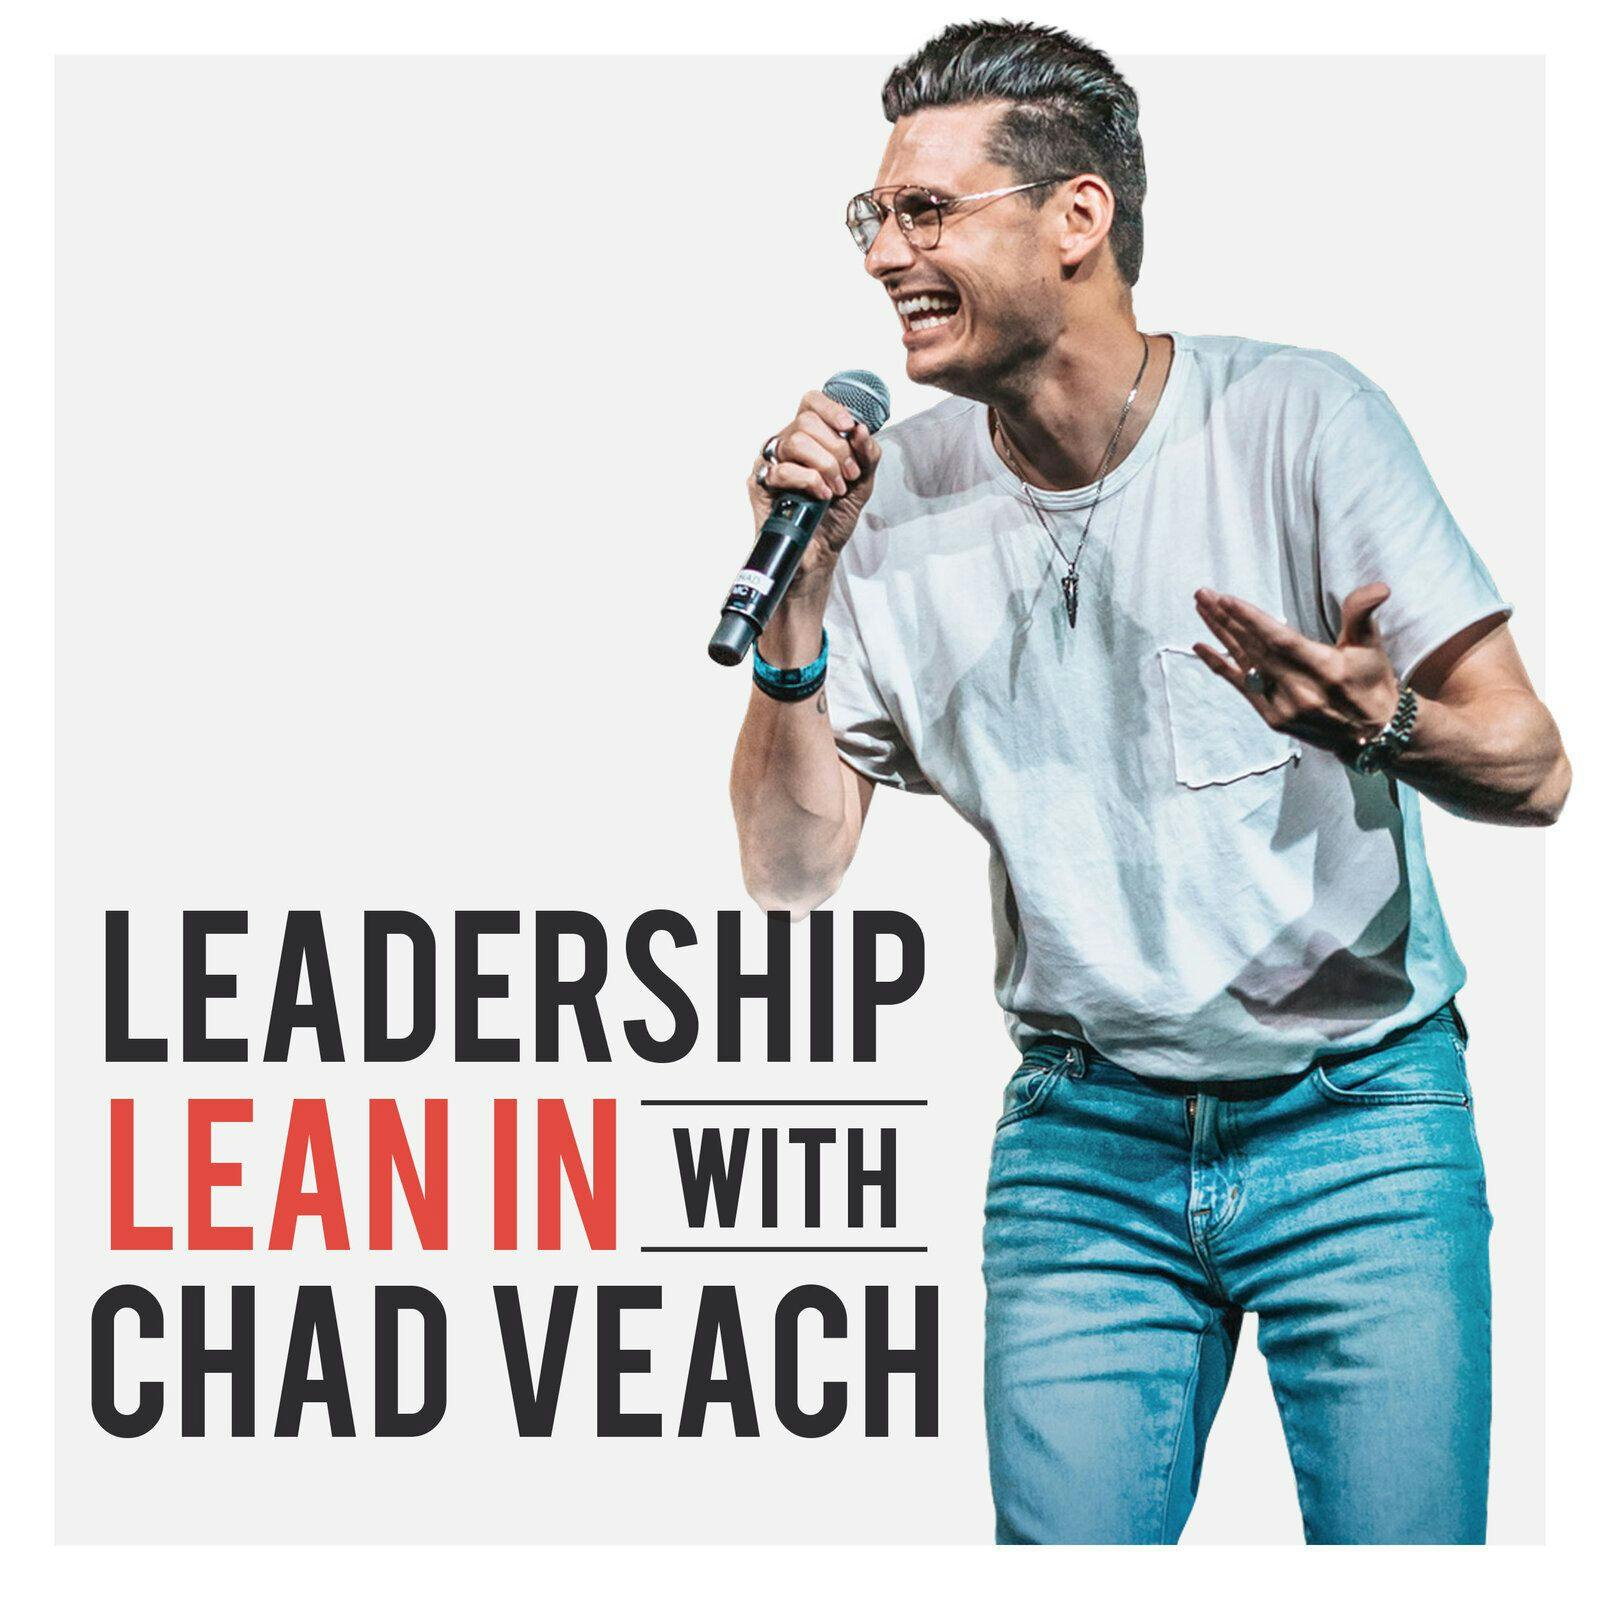 59: 7 WAYS TO LEAD